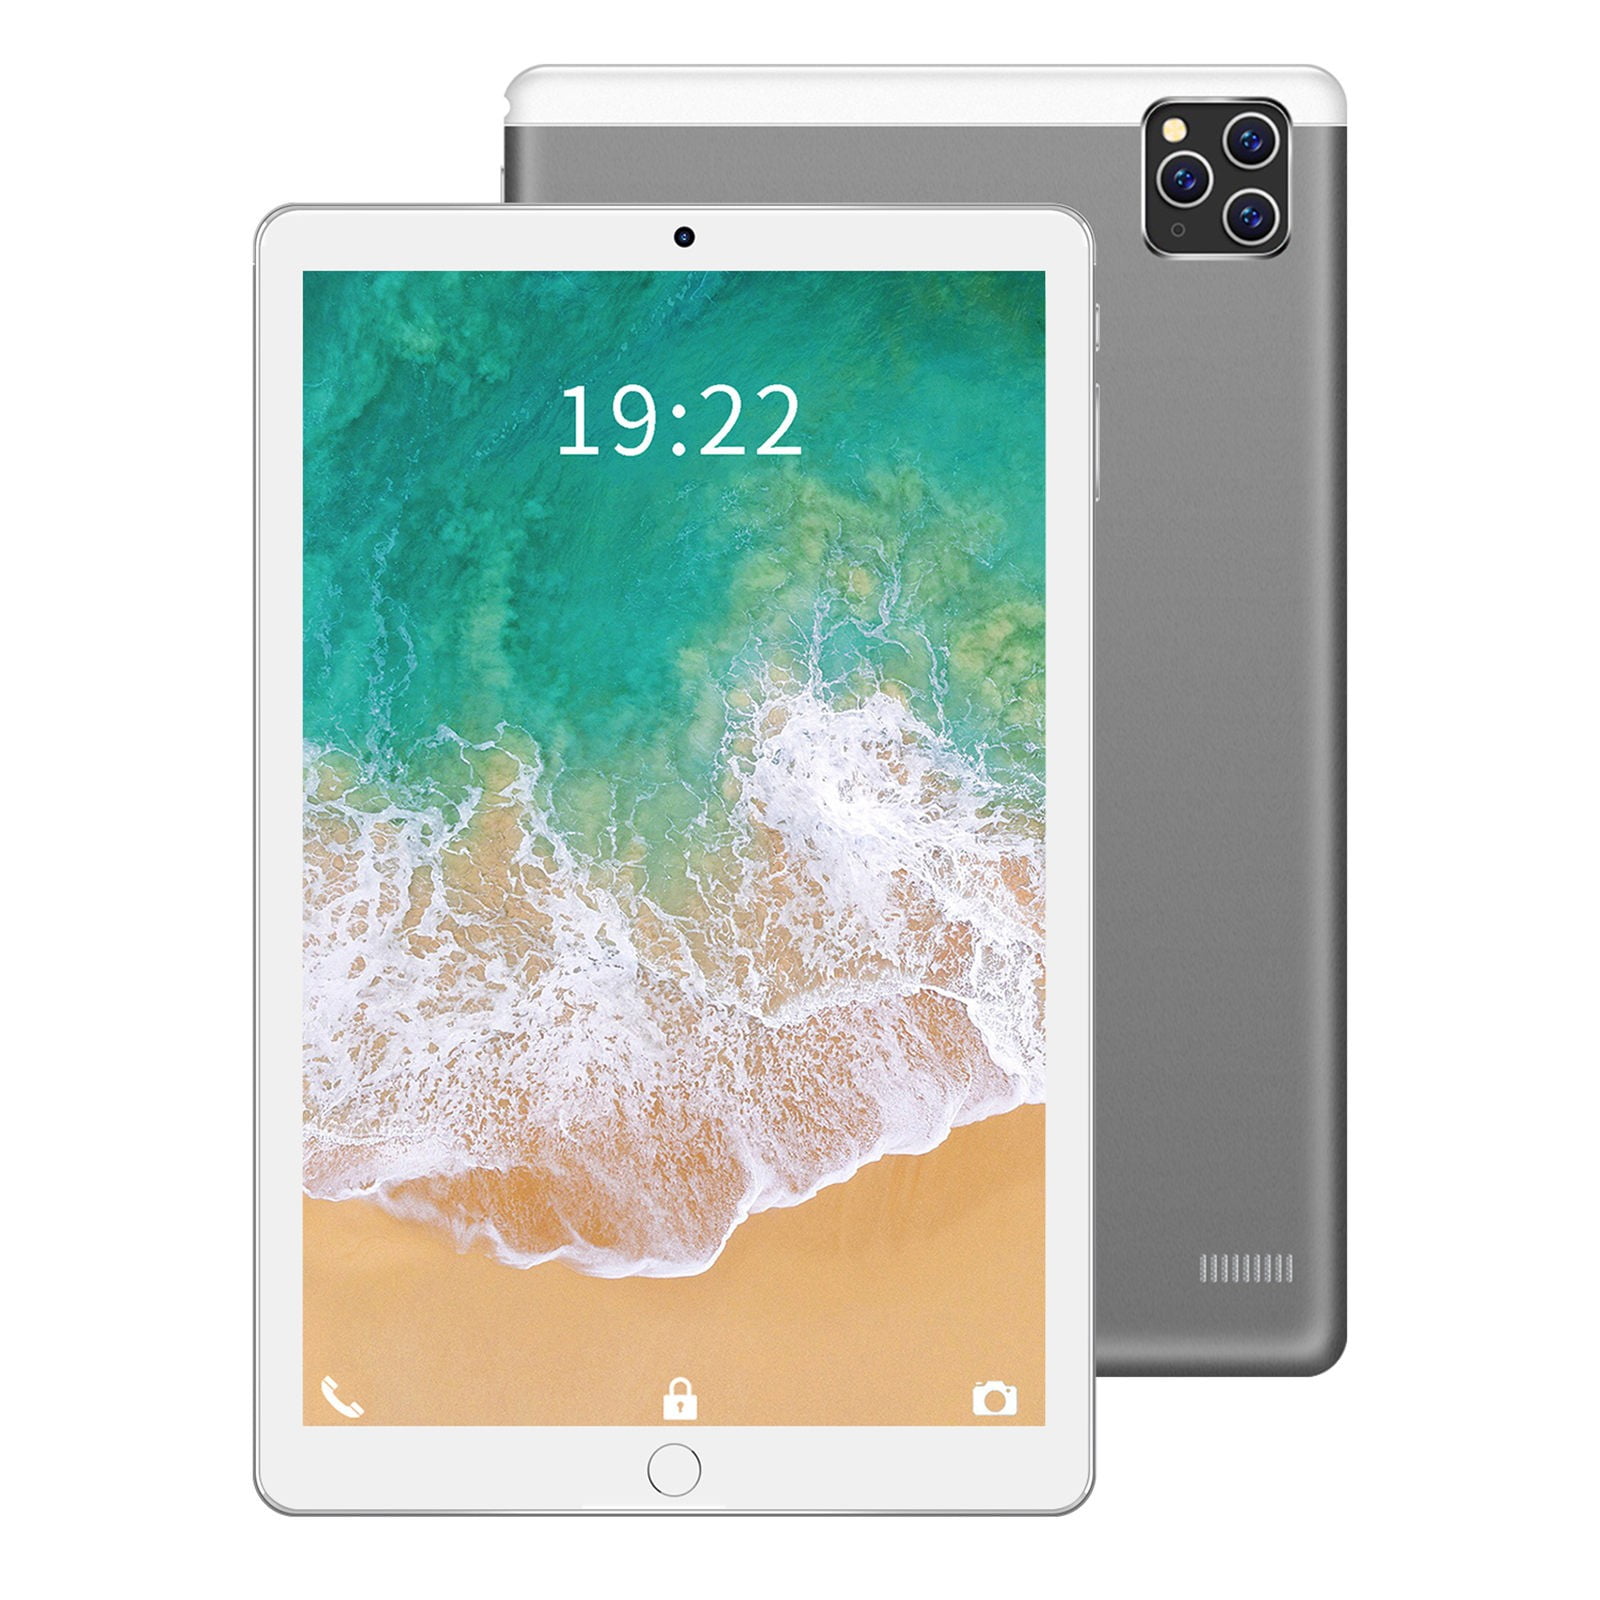 Tablet 10.1 inch Android Tablet,3G Phone Call WiFi India